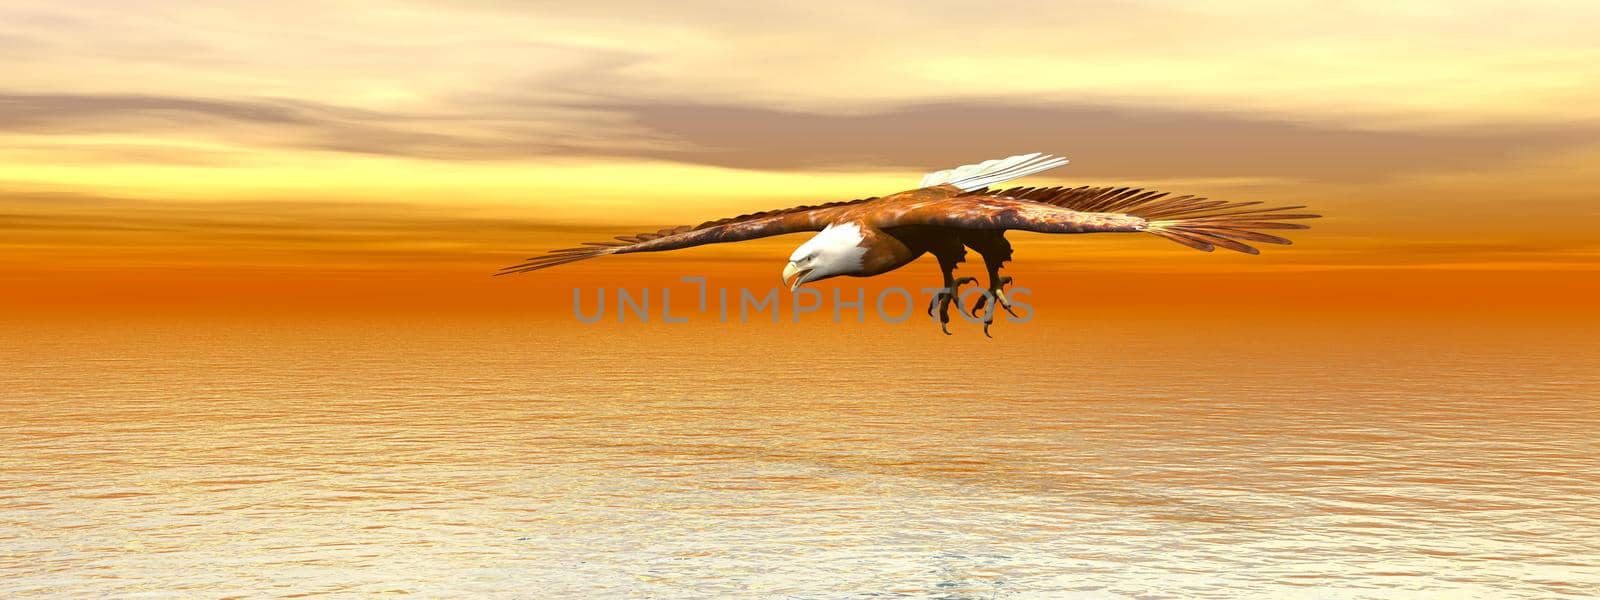 Bald eagle flying - 3D rendering by mariephotos